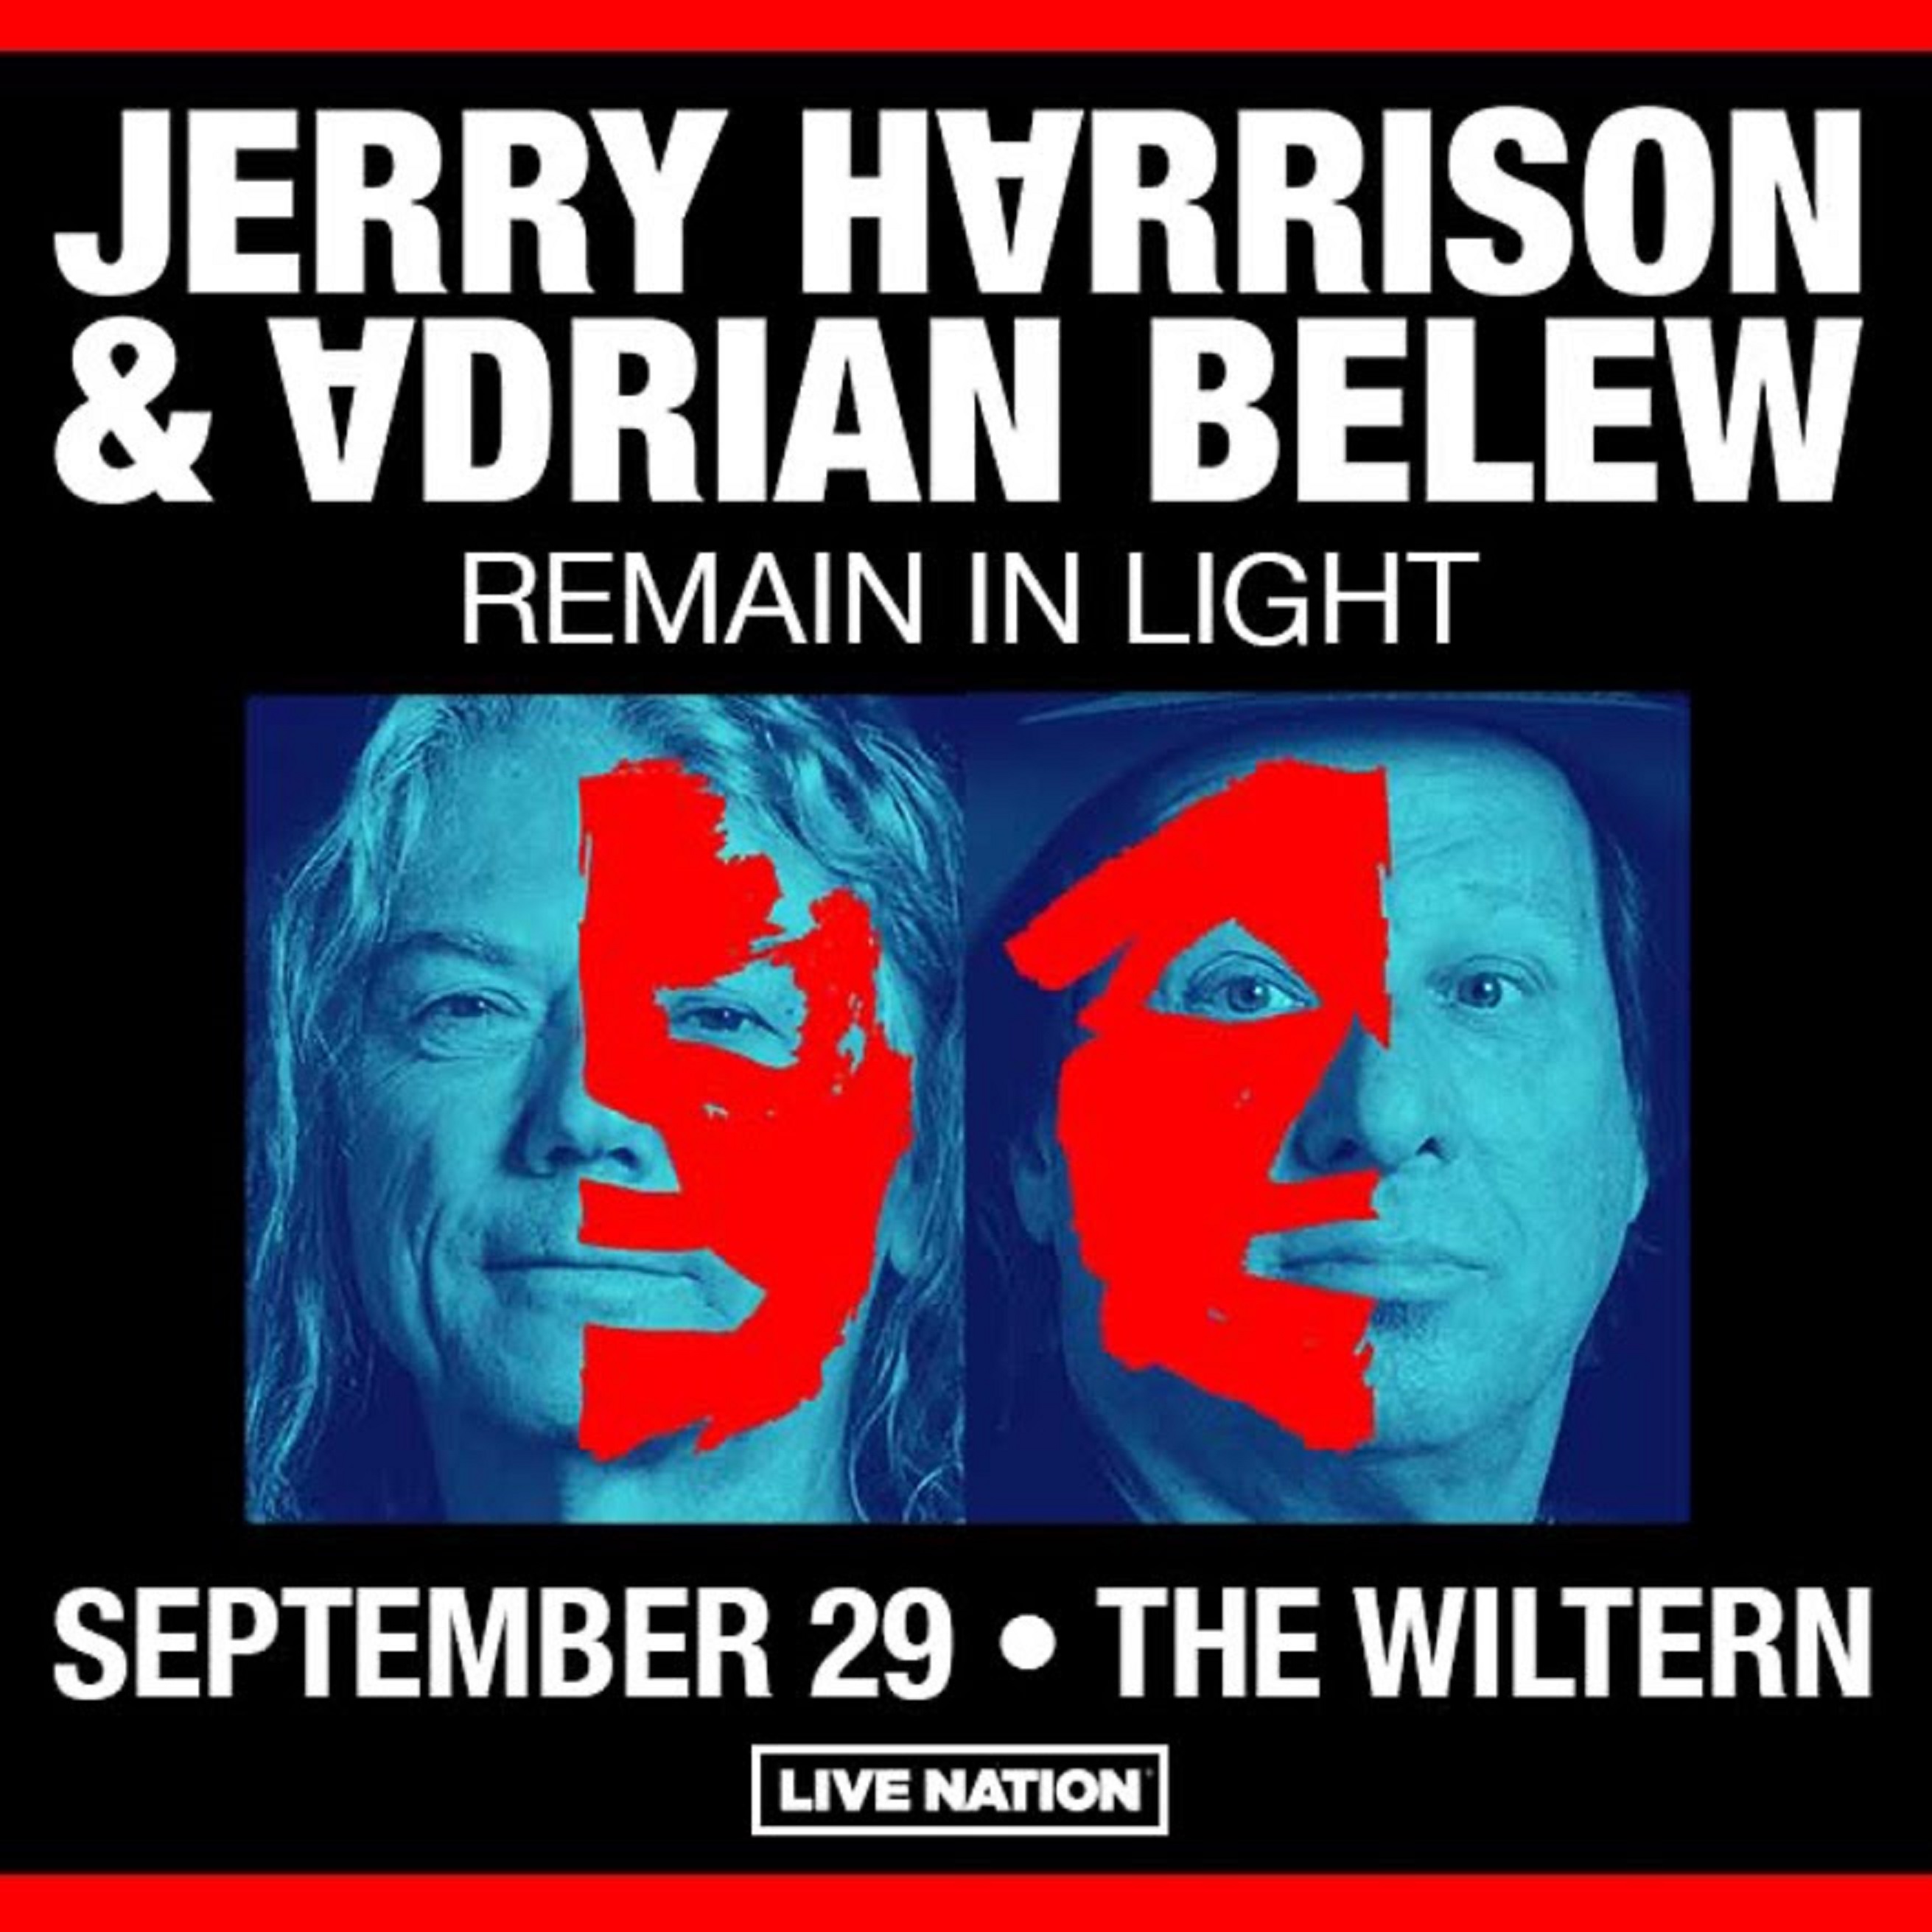 Talking Heads’ Jerry Harrison, Adrian Belew Reunite For ‘Remain In Light' at The Wiltern